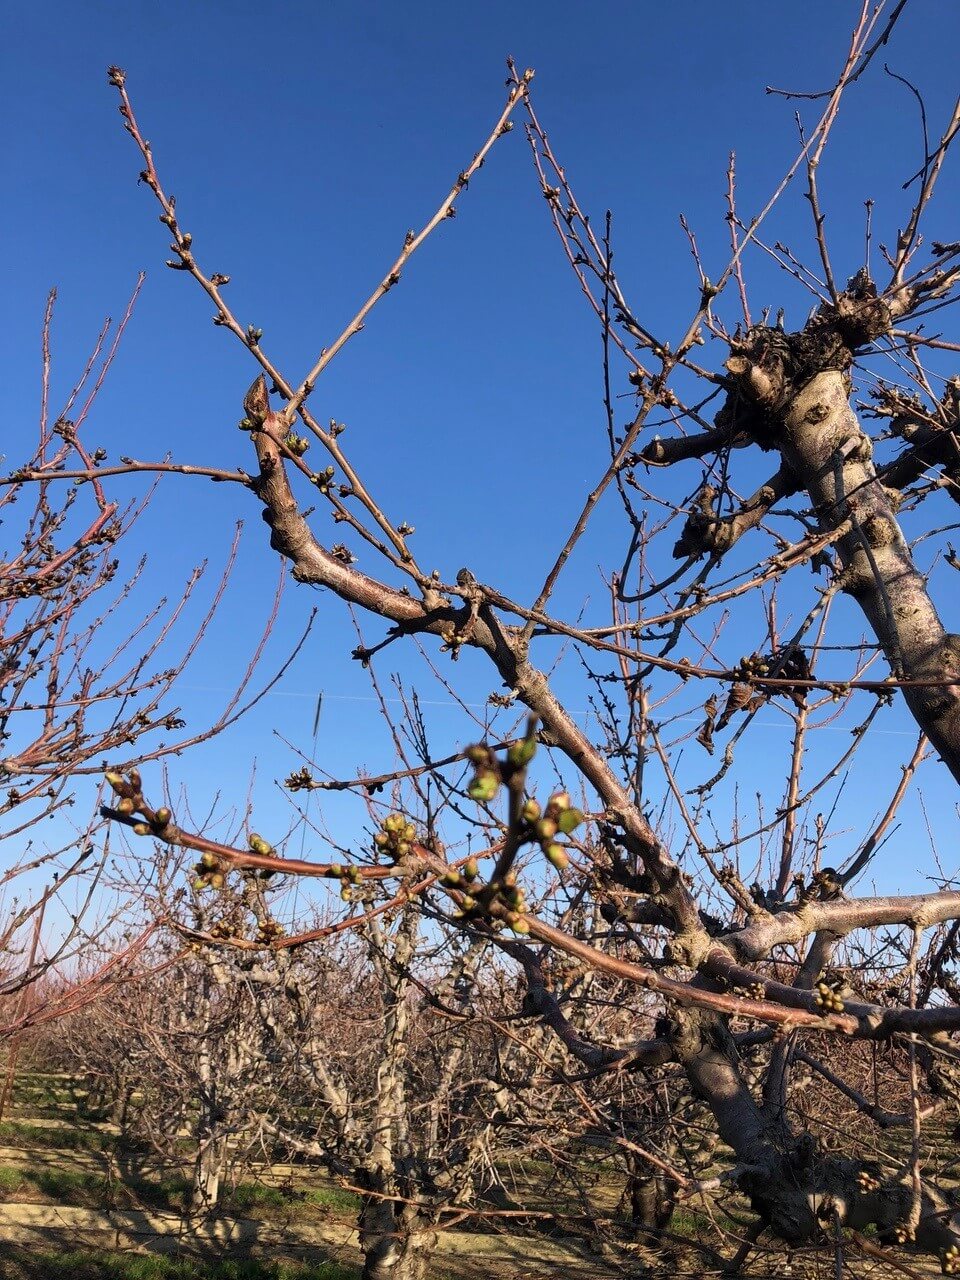 CA Cherry trees before blooming for the season